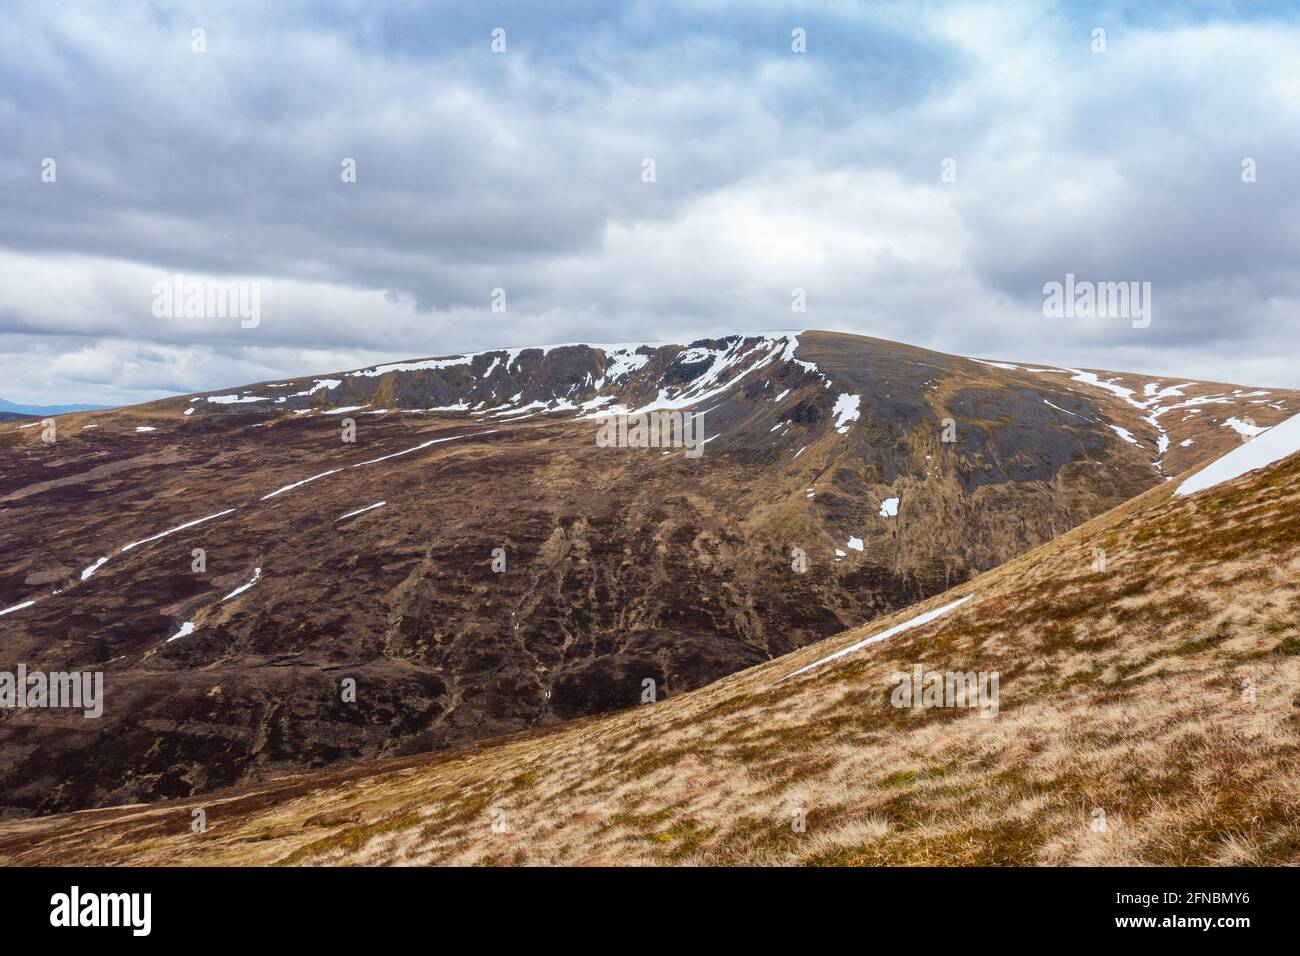 The Munro Mountain of Sgairneach Mhor to the west of the Drumochter pass, Scotland Stock Photo